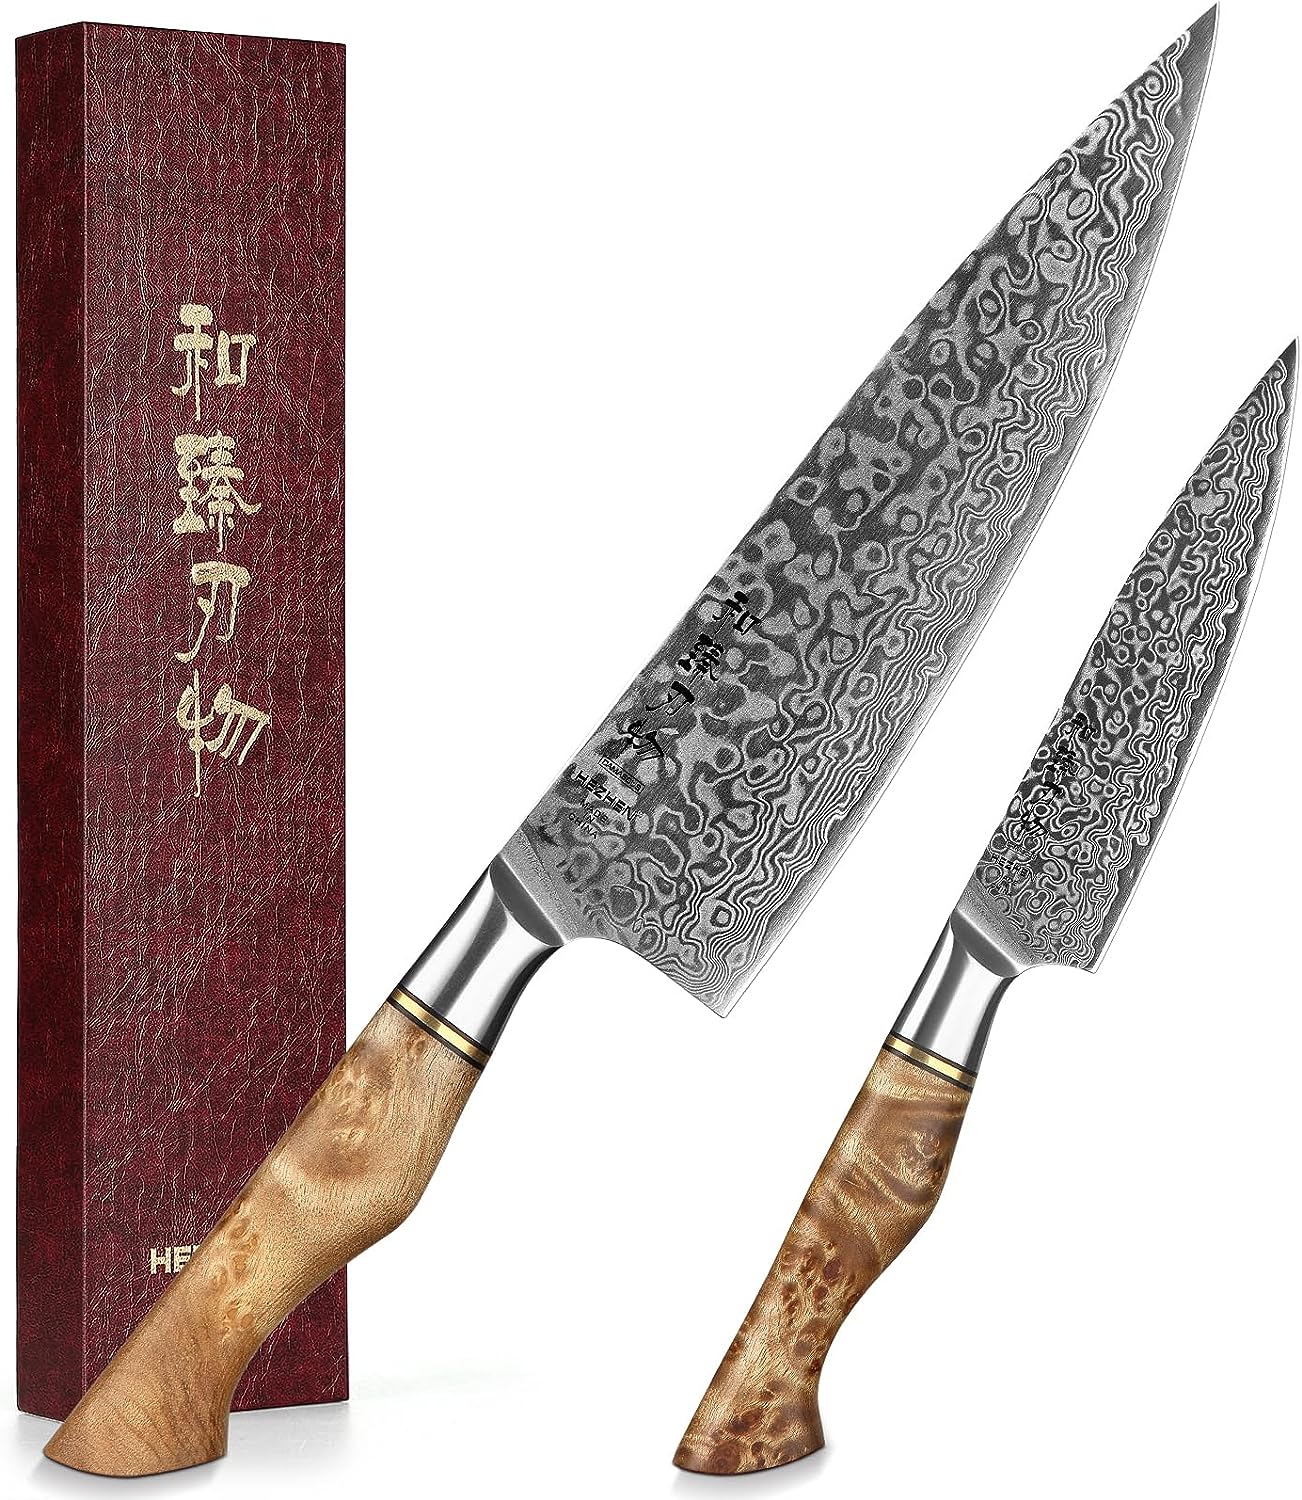 HEZHEN-67 LAYES Damascus Steel Kitchen Knife Set 2PCS,8.3 Chef knife 5 Utility Knife Figured Sycamore Wood Handle with Gift Box